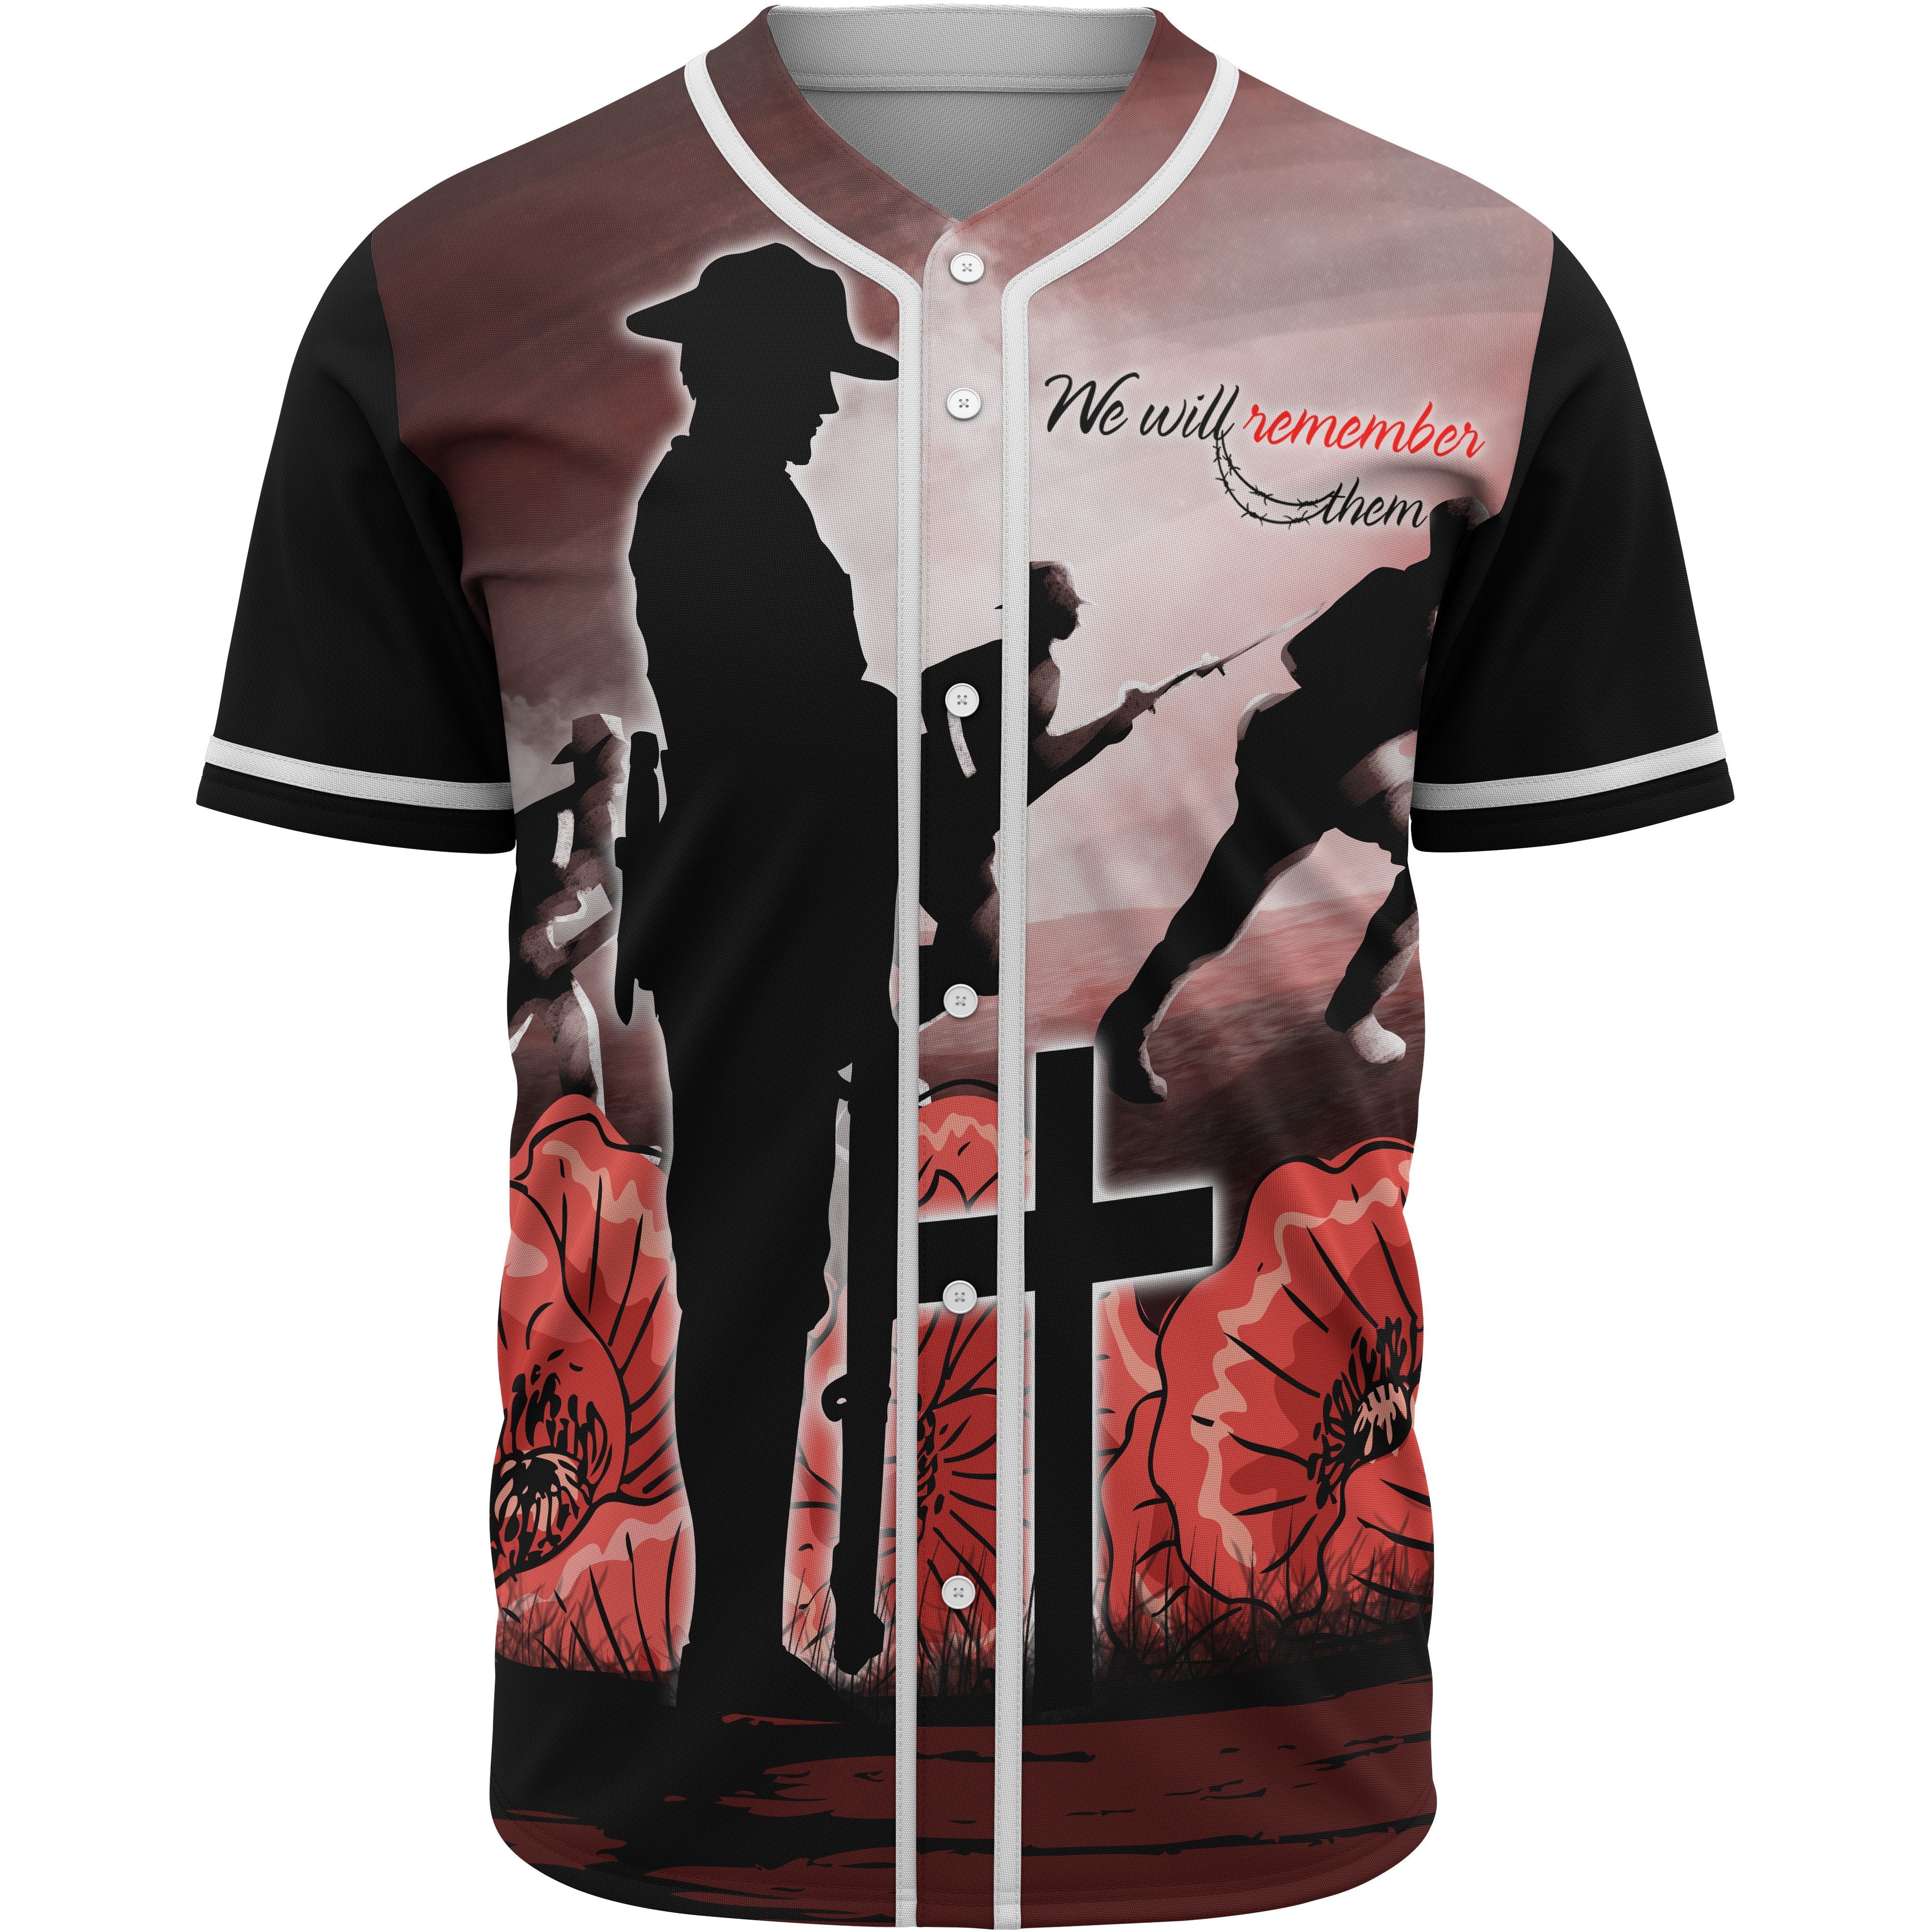 anzac-day-baseball-shirt-we-will-remember-them-special-version